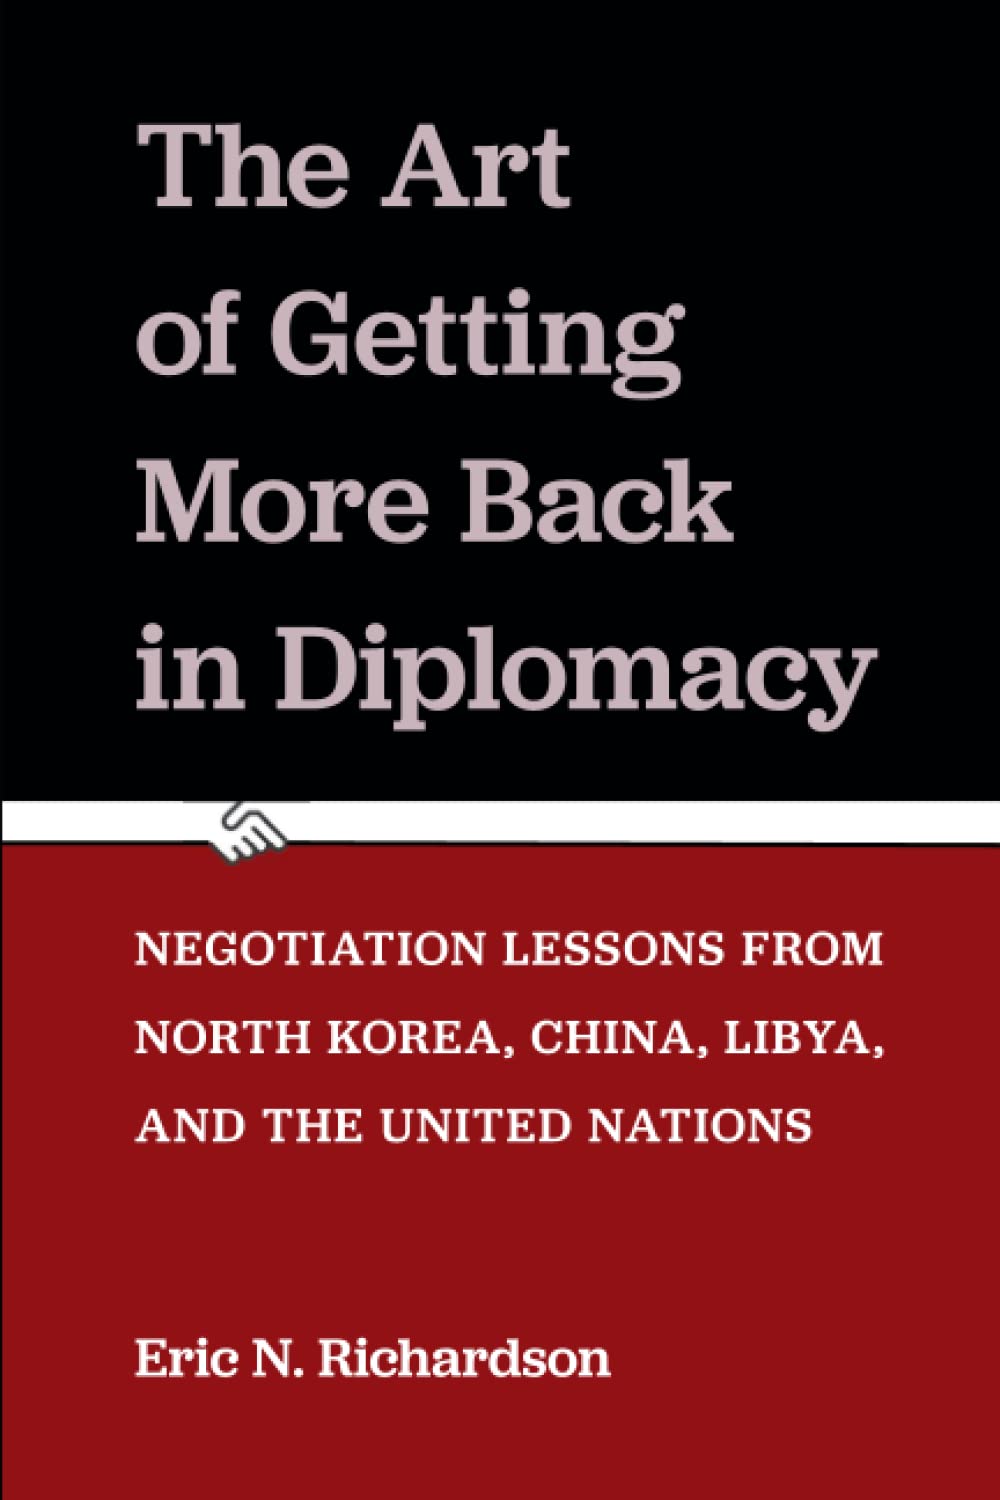 The art of getting more back in diplomacy